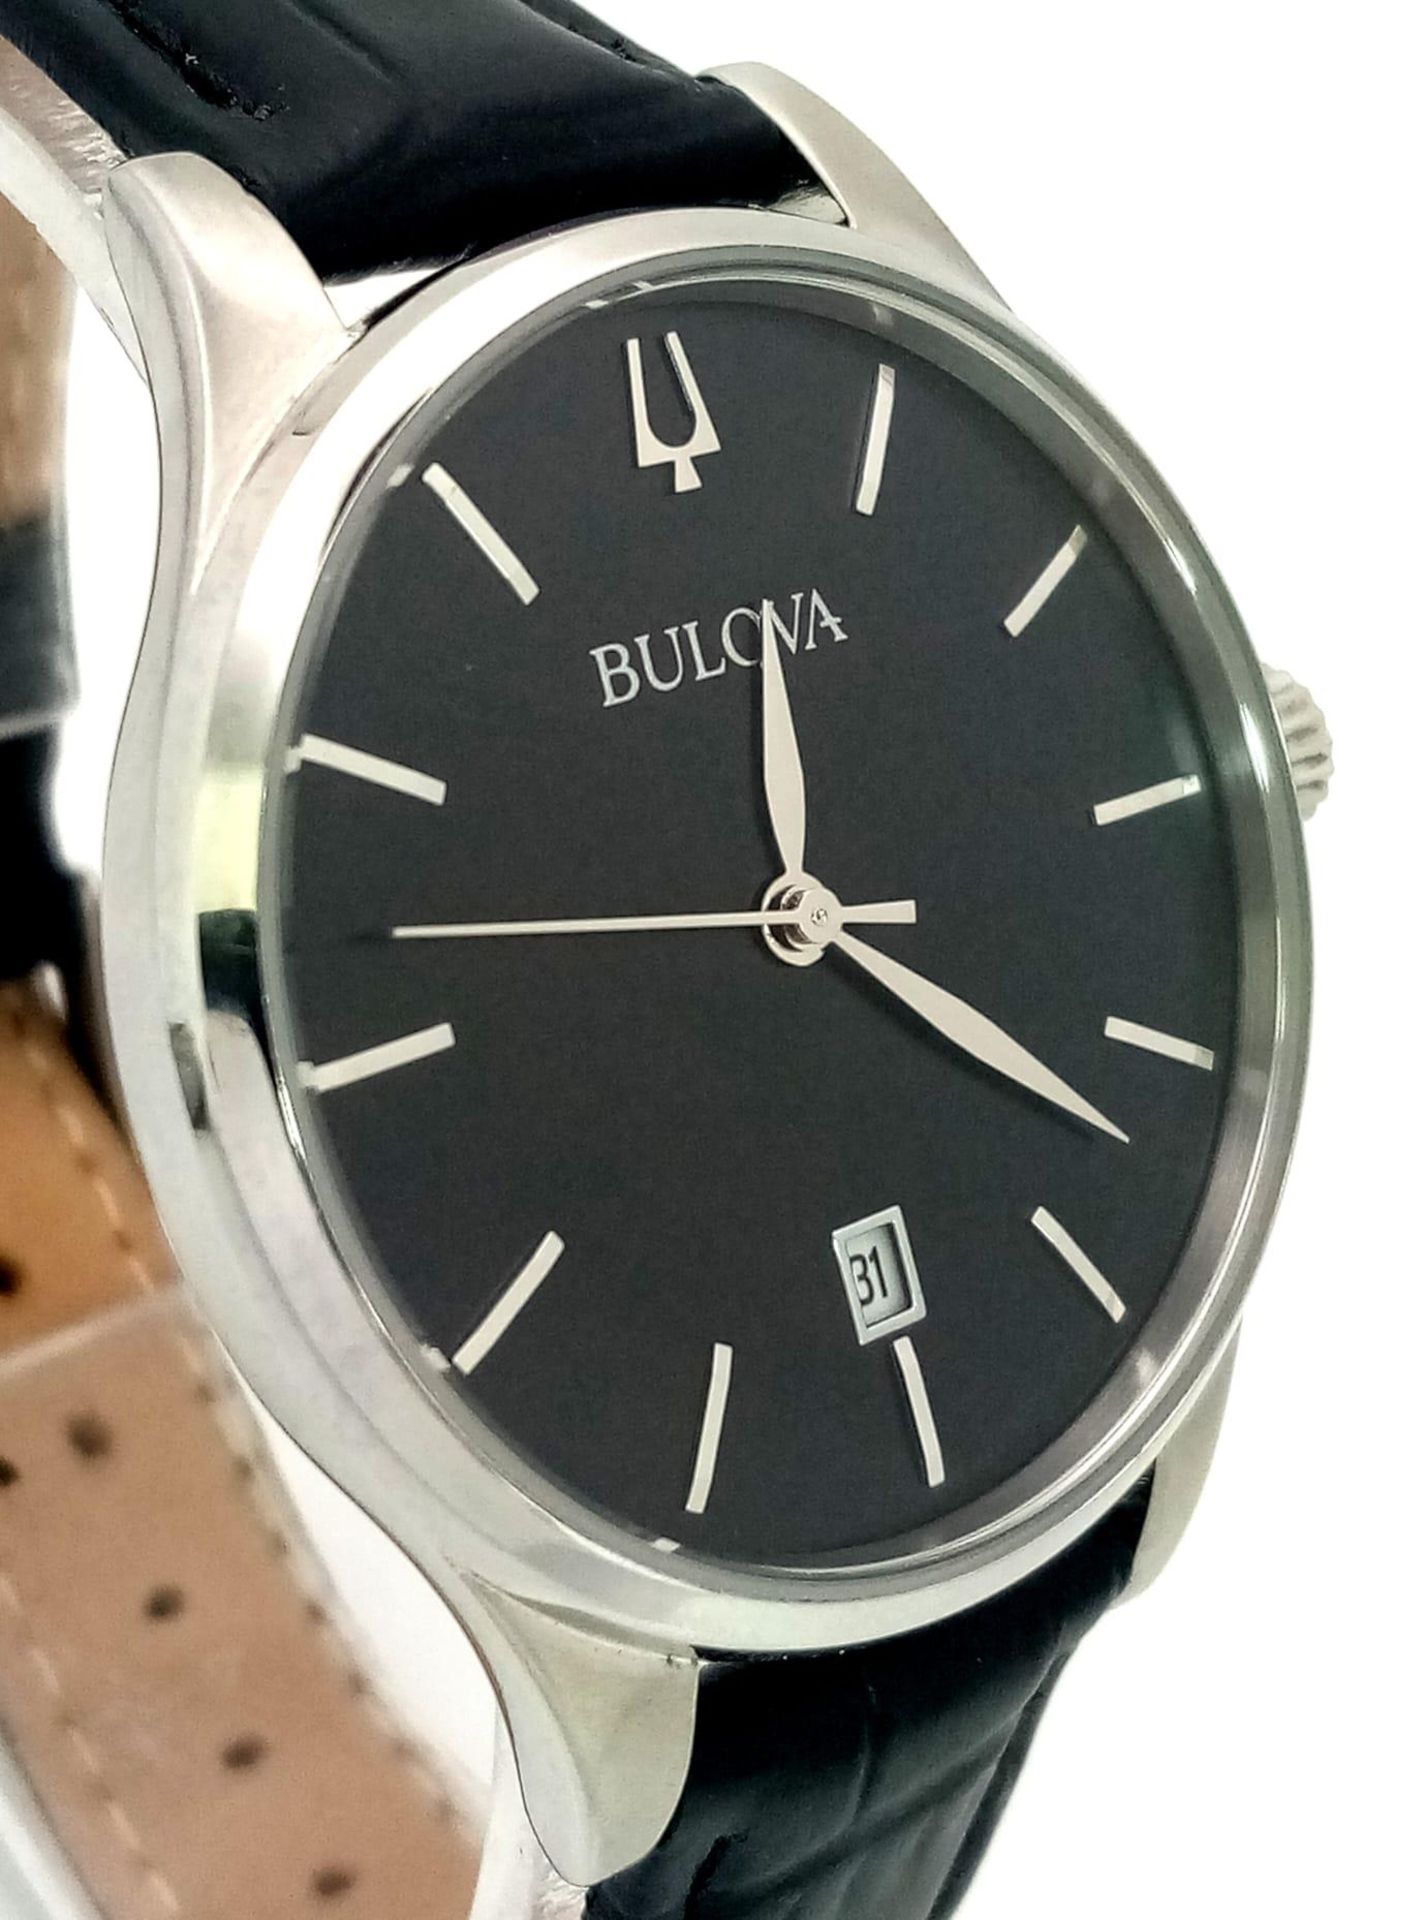 A Classic Bulova Quartz Unisex Watch. Black leather strap. Stainless steel case - 36mm. Black dial - Image 3 of 6